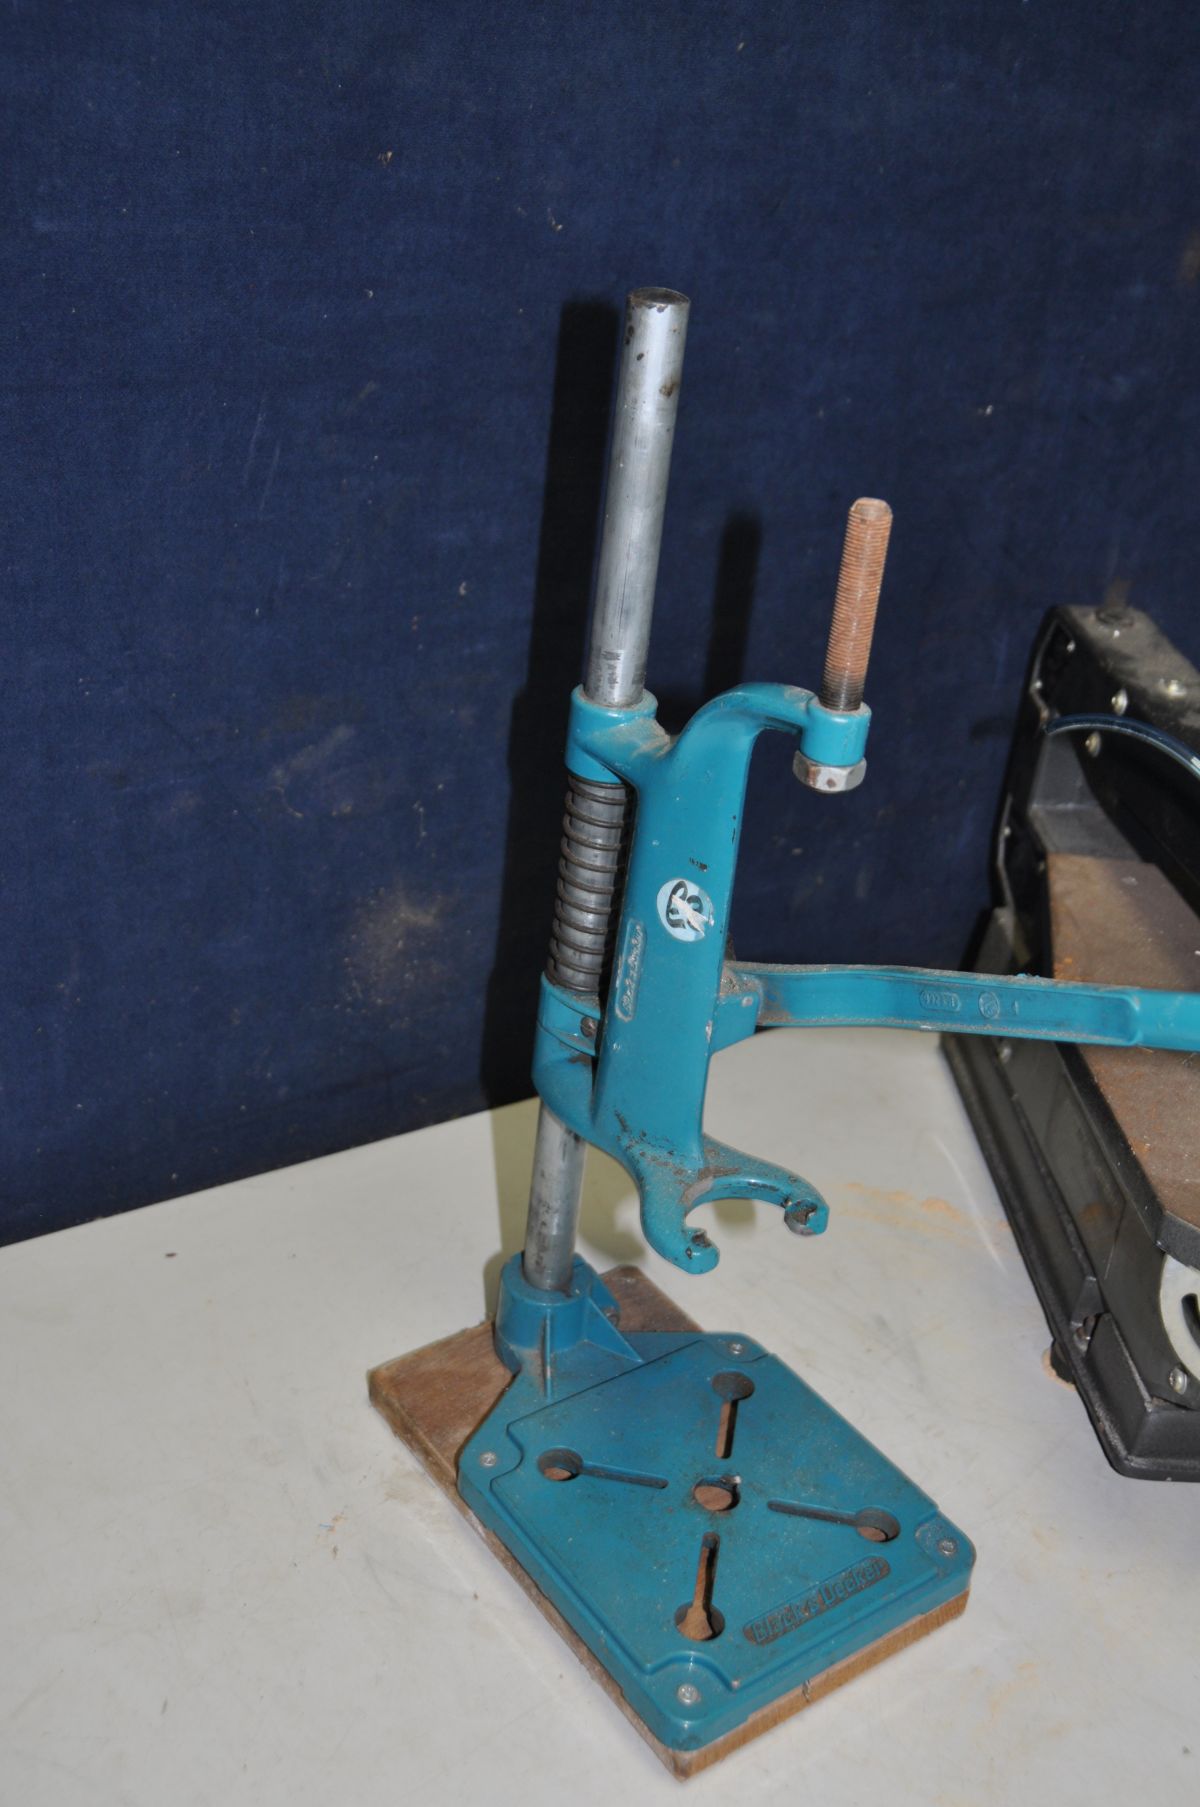 A PERFORMANCE POWER SS16-4 ELECTRIC SCROLL SAW (PAT pass and working - breather pipe broken) and a - Image 2 of 3